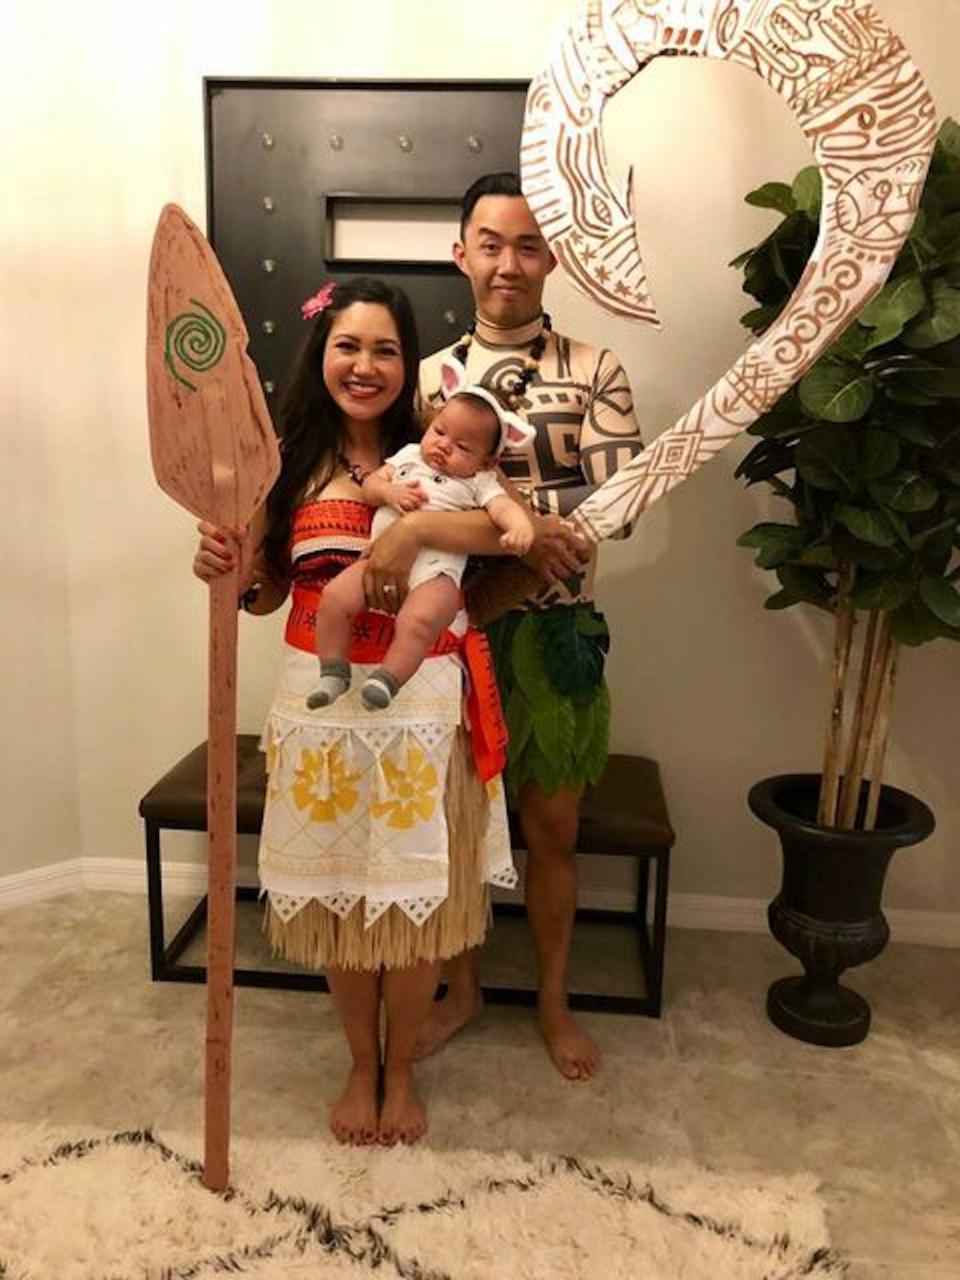 A couple dressed as Moana and Maui pose holding a paddle, sword, and a baby.